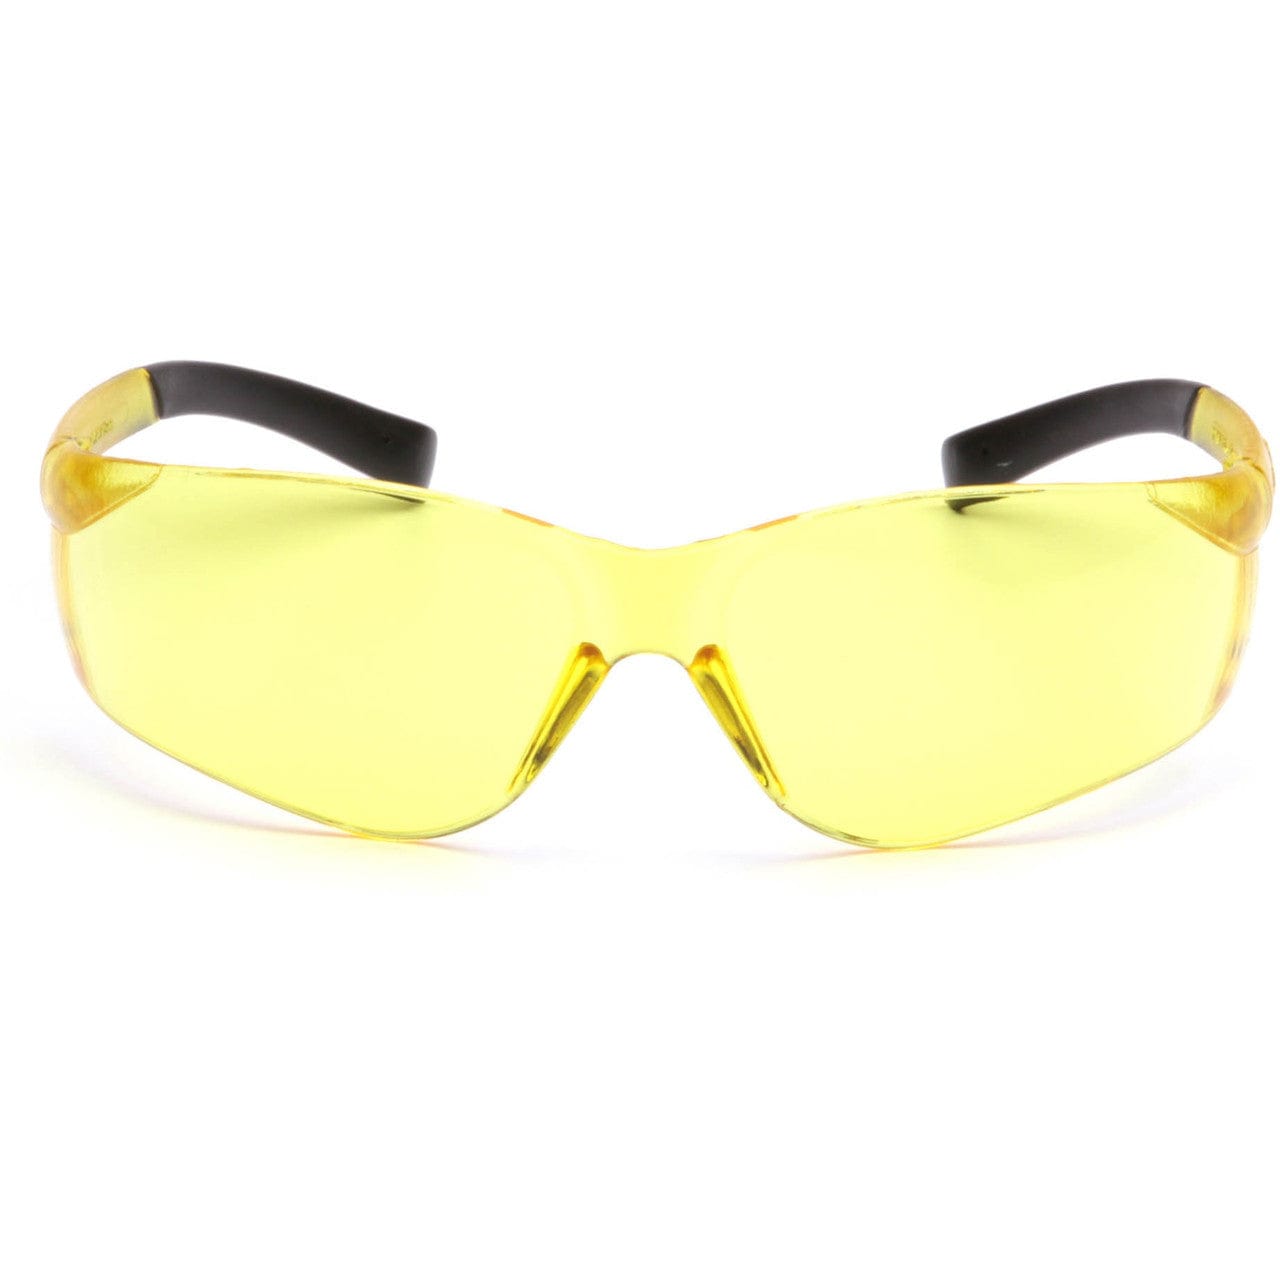 Pyramex Ztek Safety Glasses with Amber Lens S2530S Front View